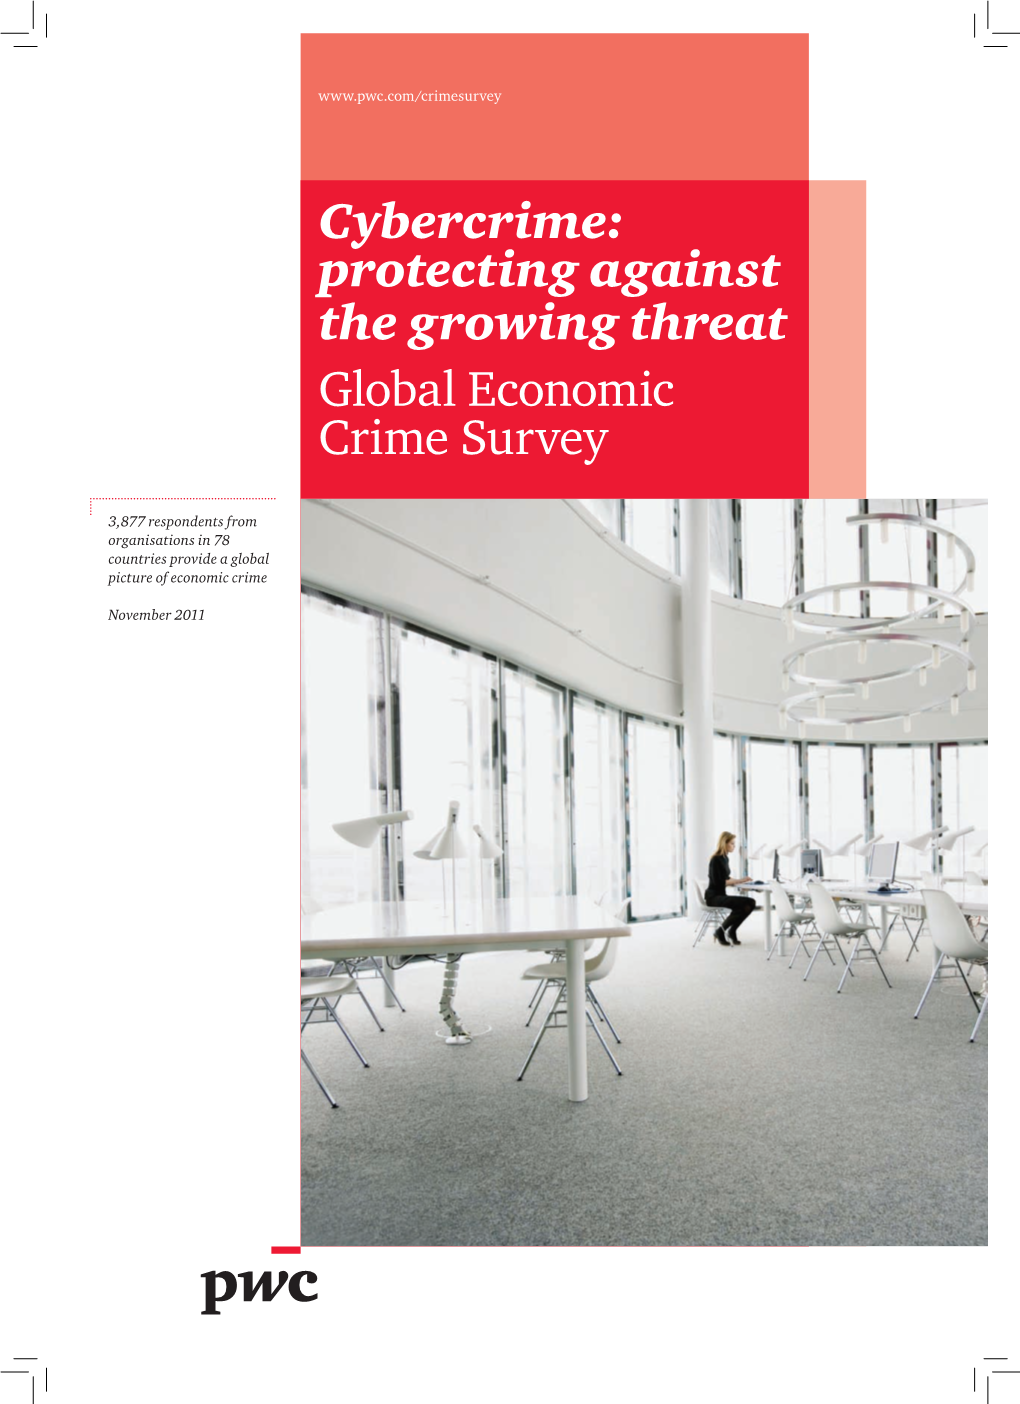 Cybercrime: Protecting Against the Growing Threat Global Economic Crime Survey